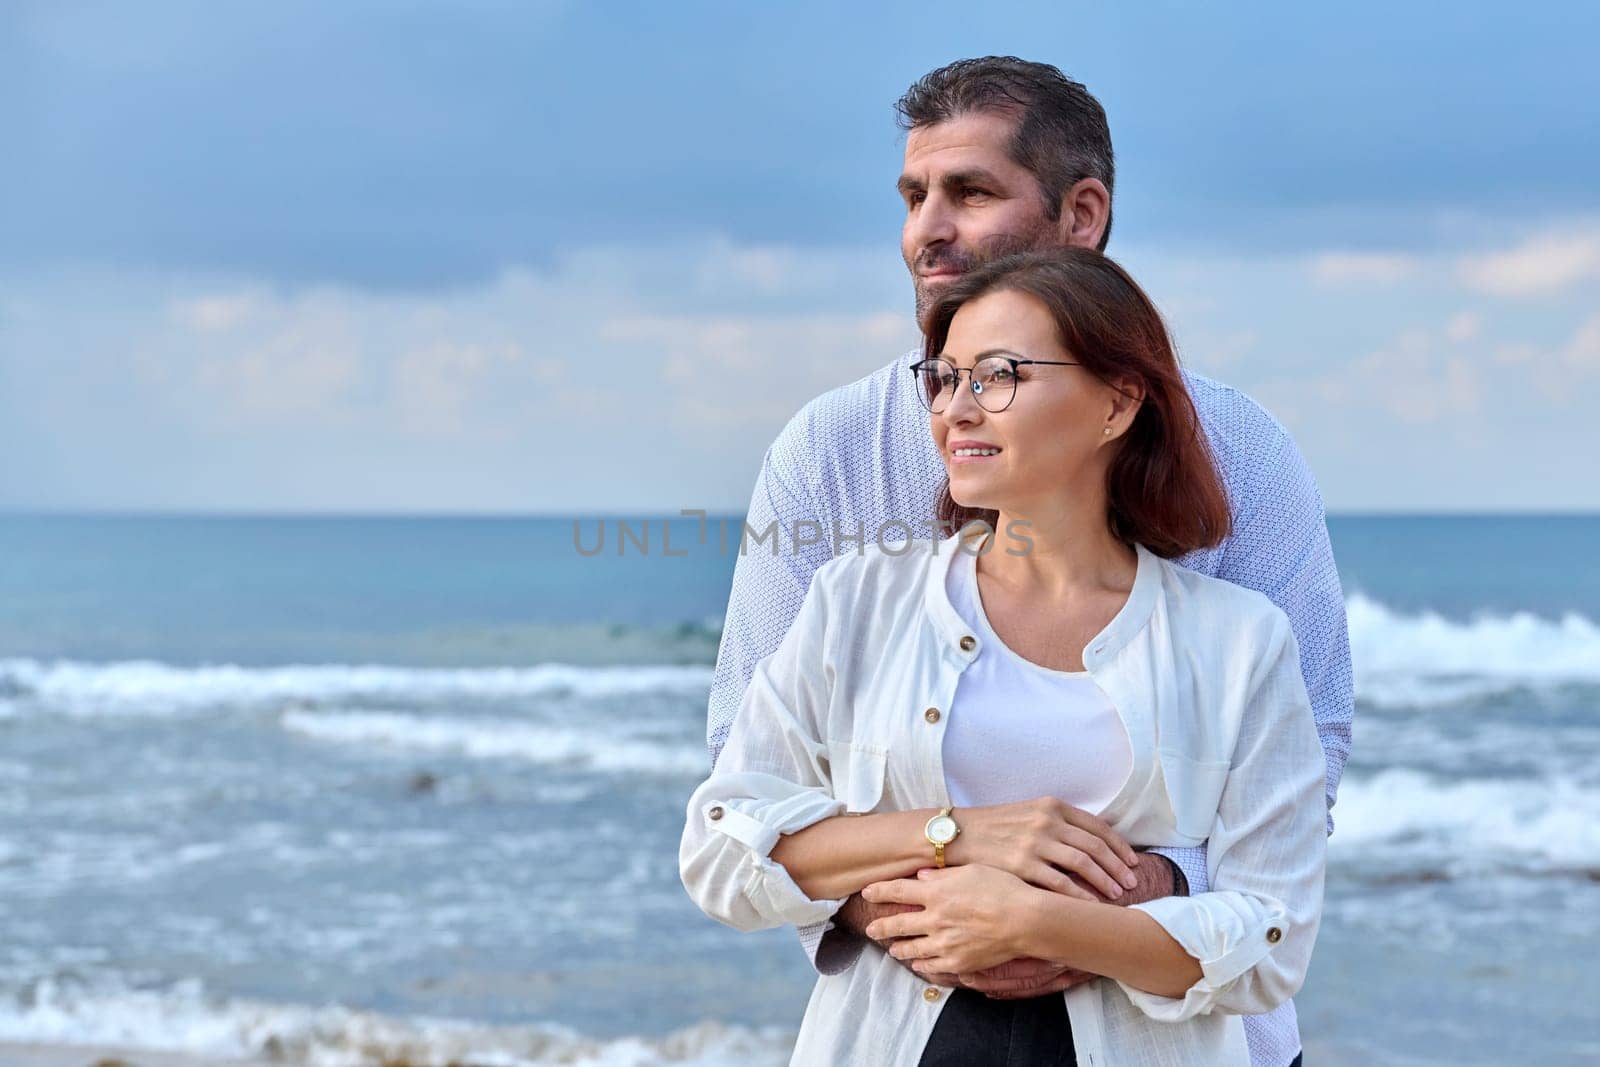 Outdoor portrait of mature couple embracing against background of sea nature, copy space. Middle-aged happy romantic man and woman. Relationships, feelings, lifestyle, marriage, people concept